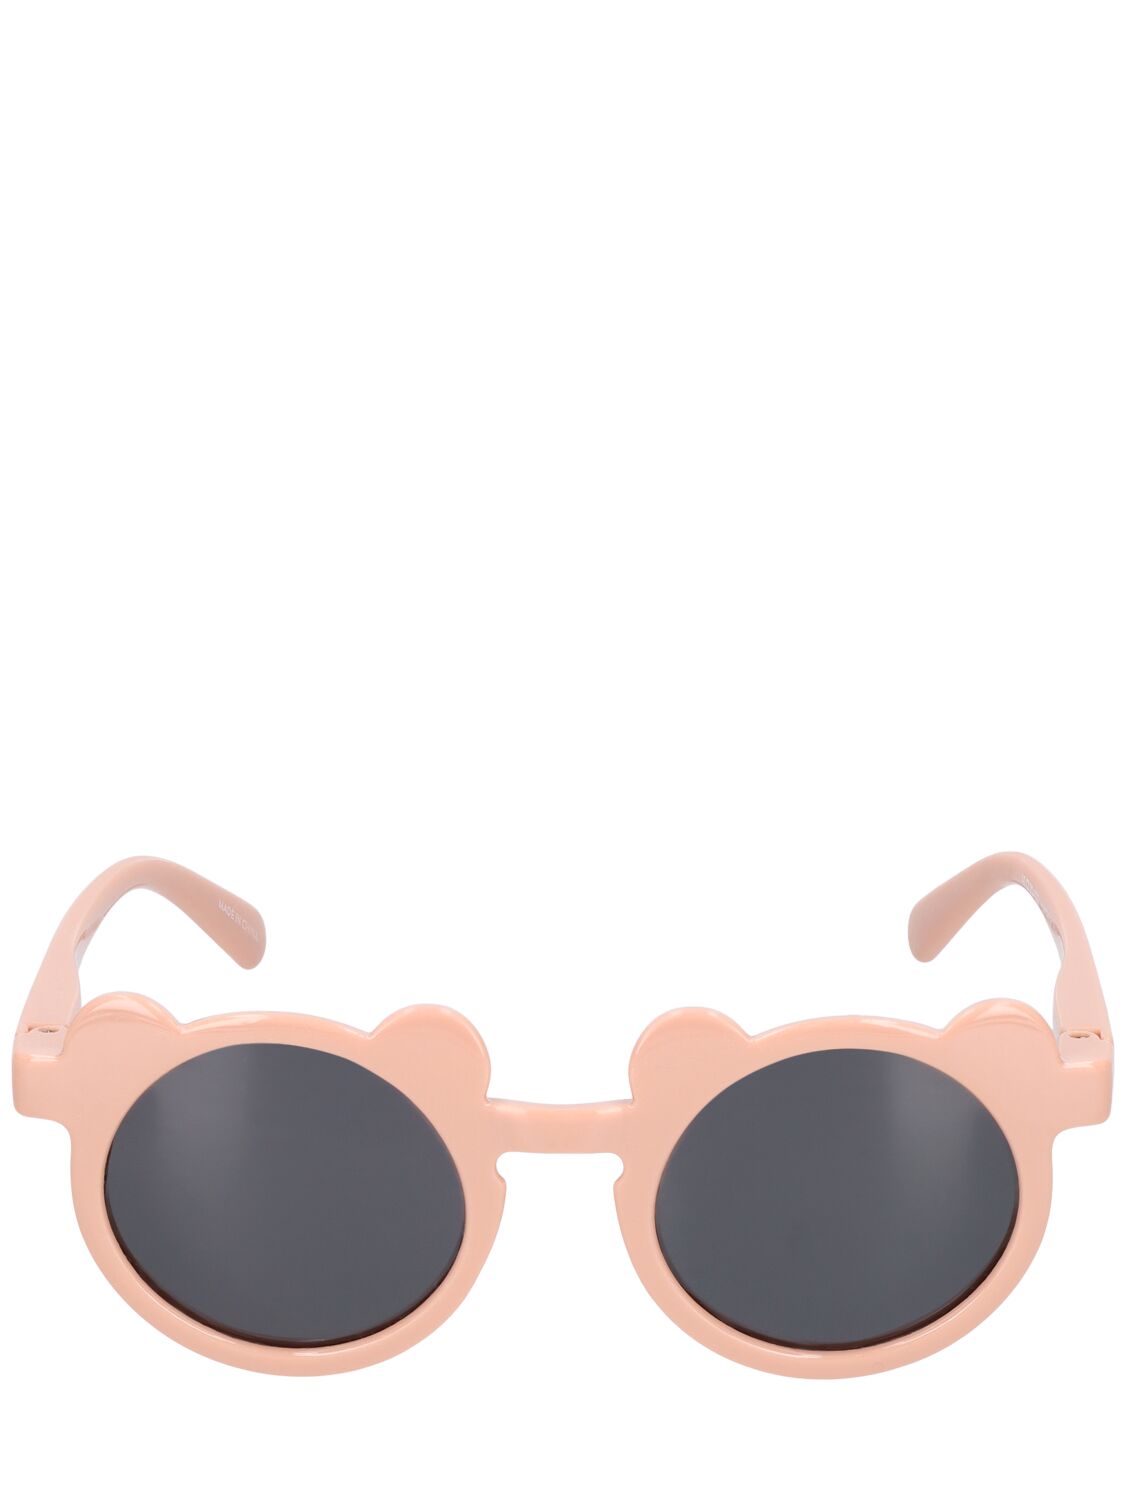 Liewood Kids' Recycled Poly Sunglasses W/ Ears In Black